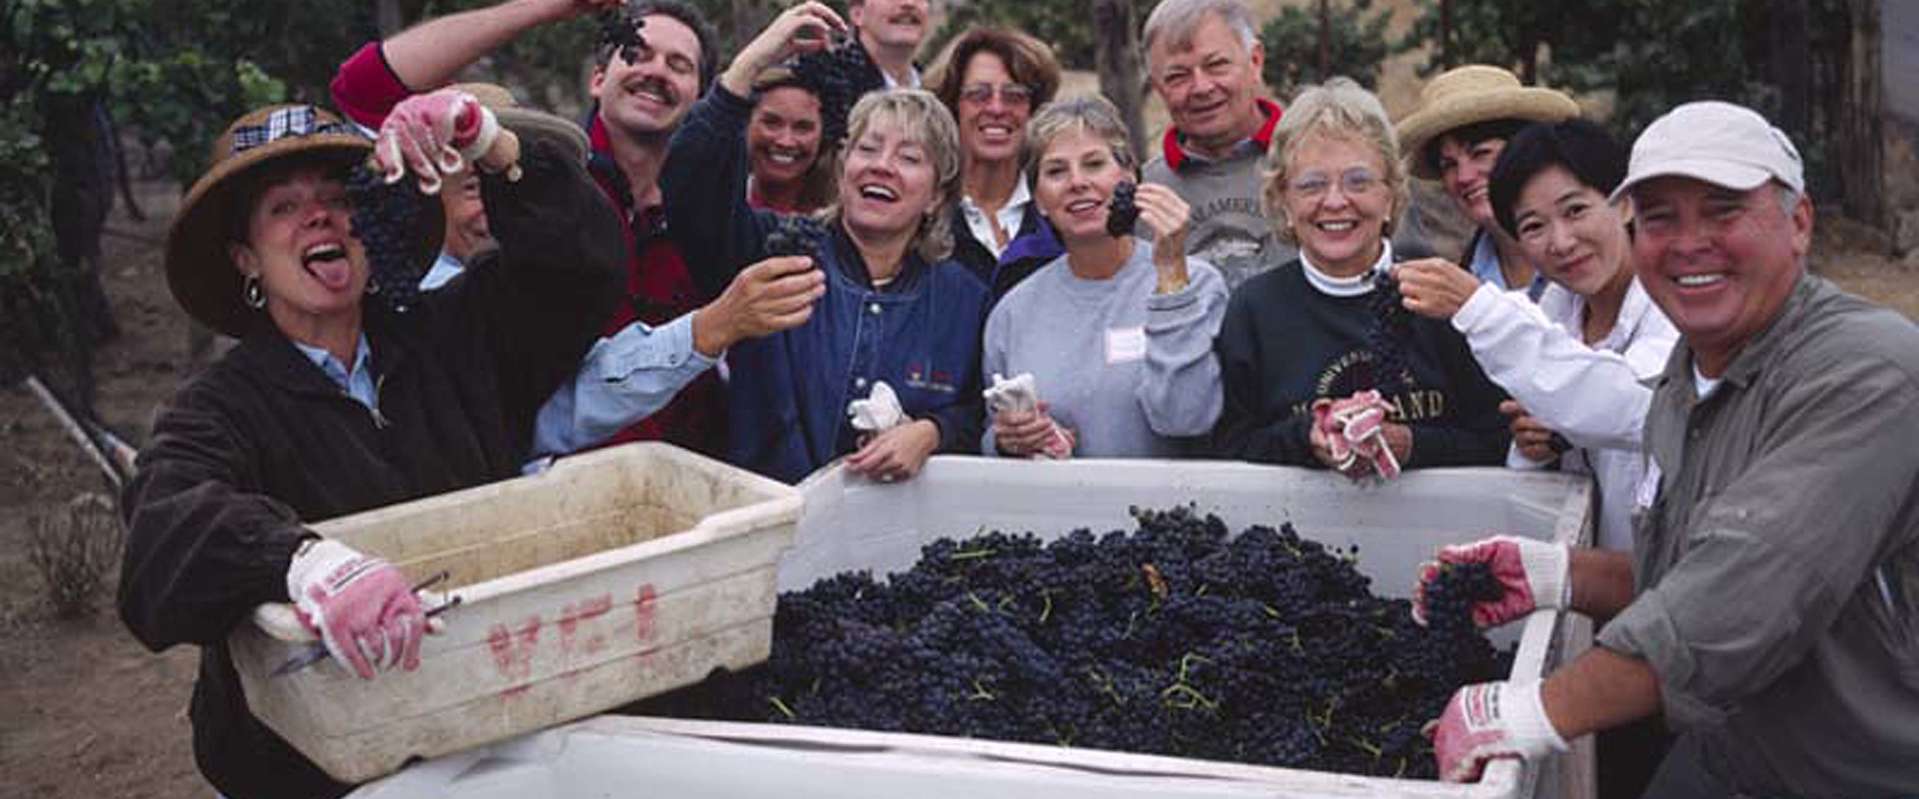 Camp Schramsberg participants surround a bin of harvested grapes